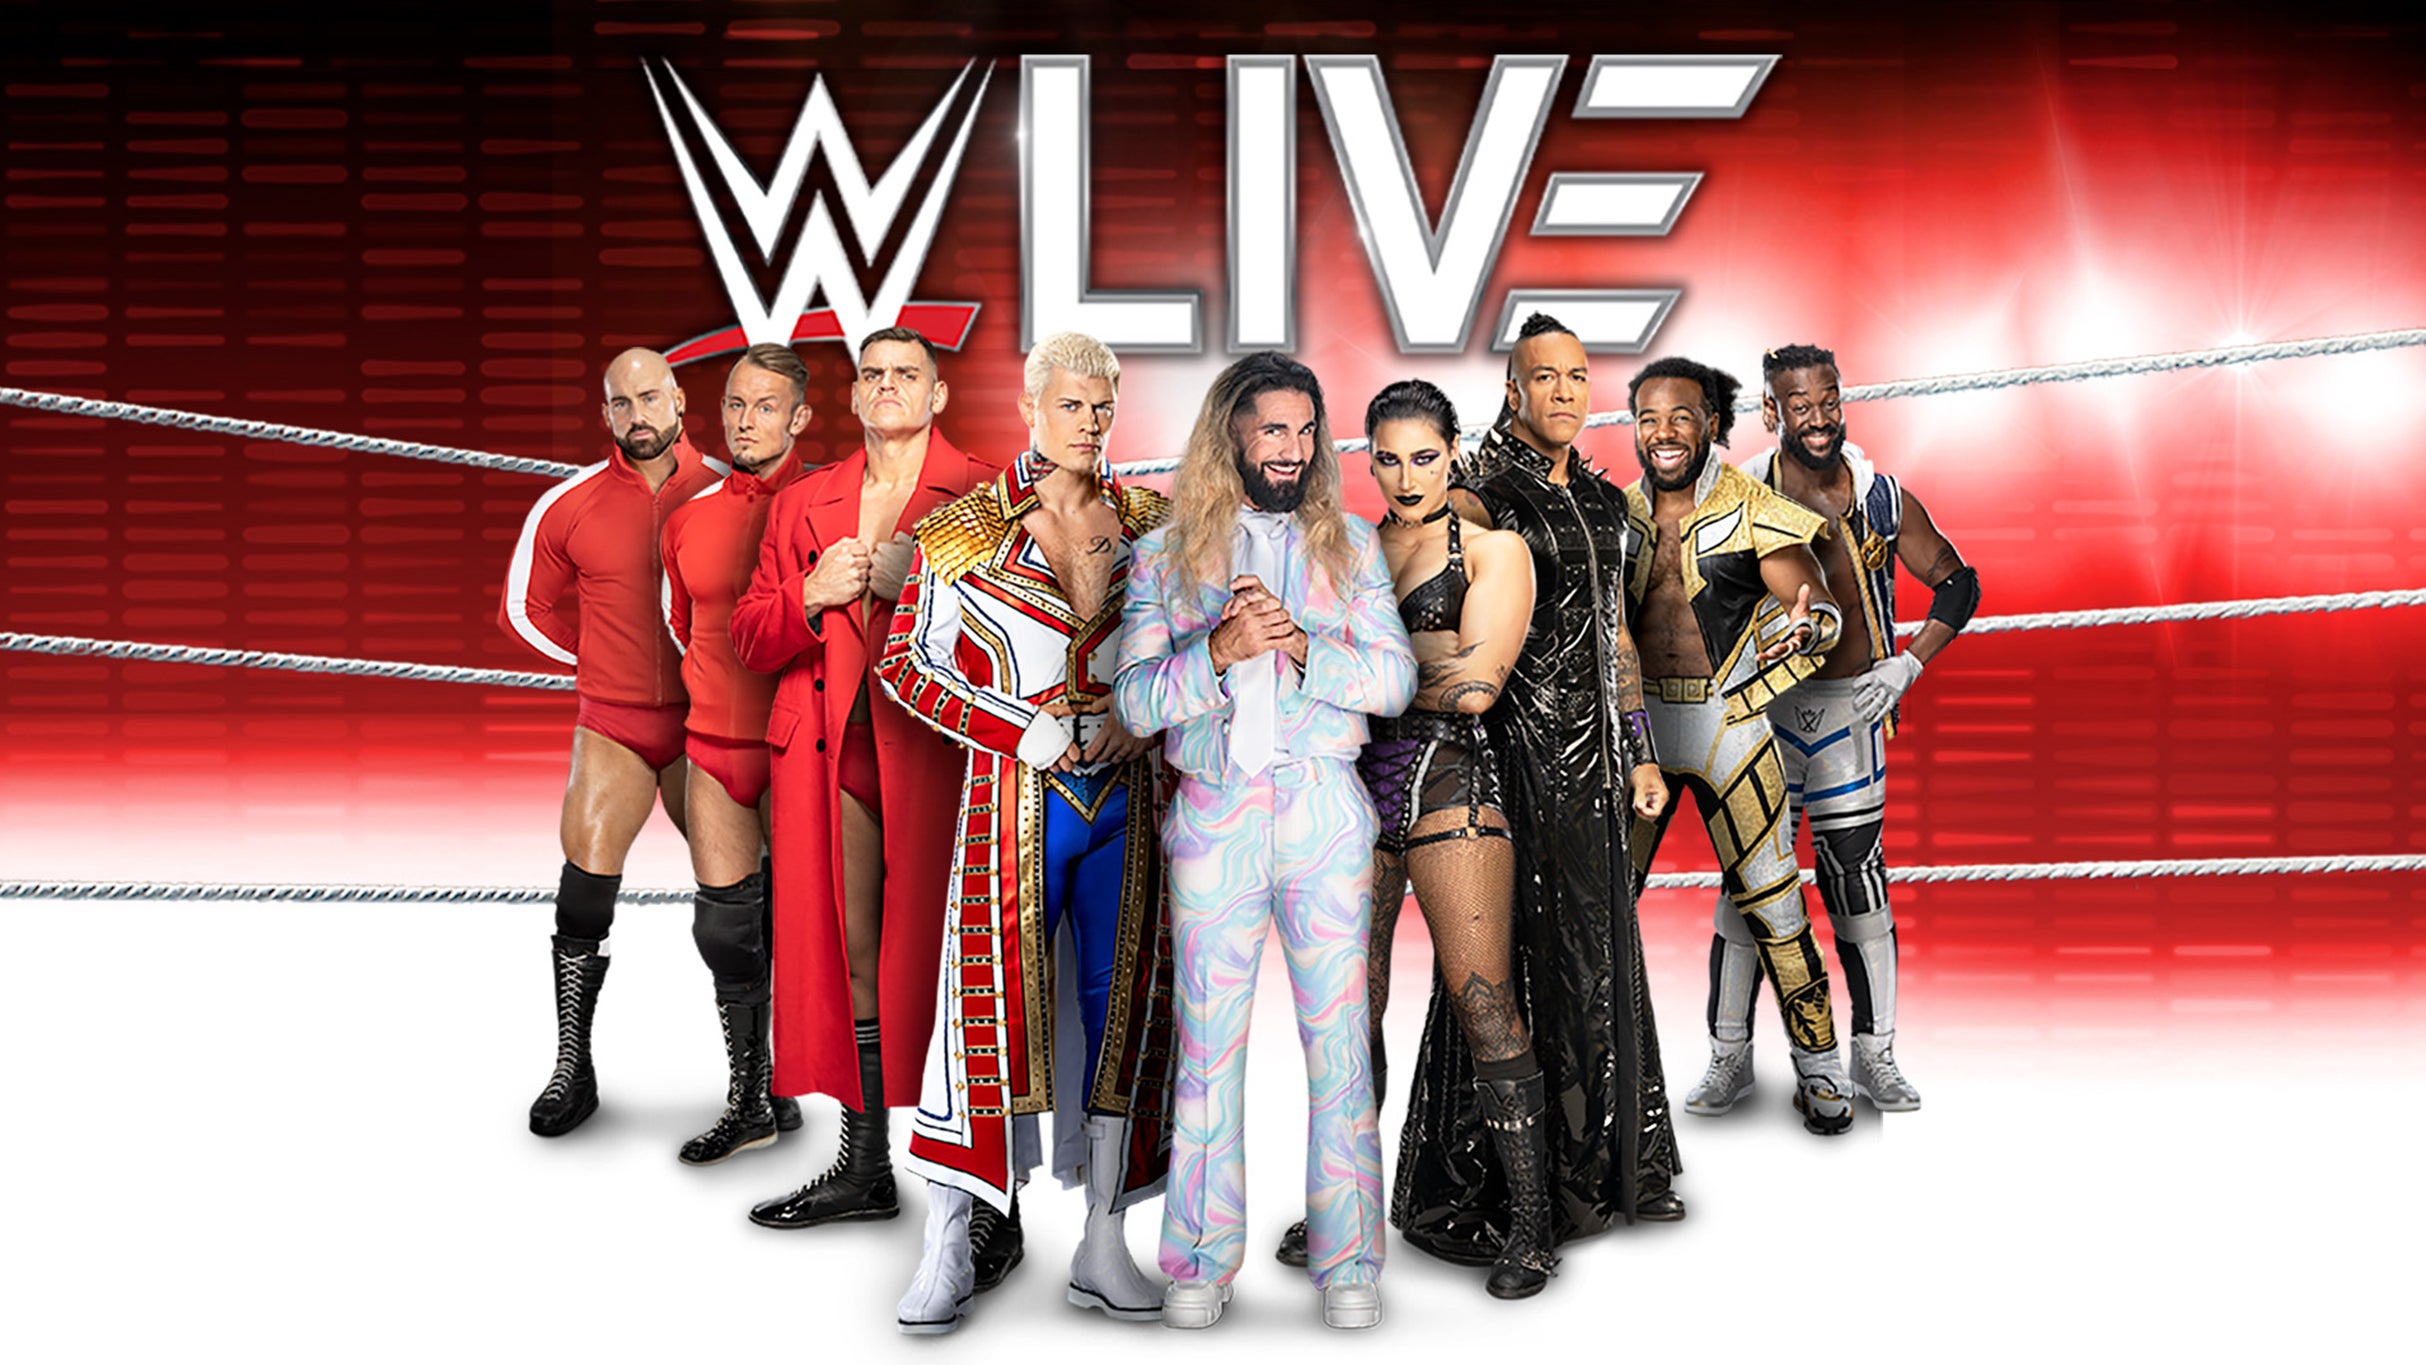 WWE Live - VIP Packages Event Title Pic